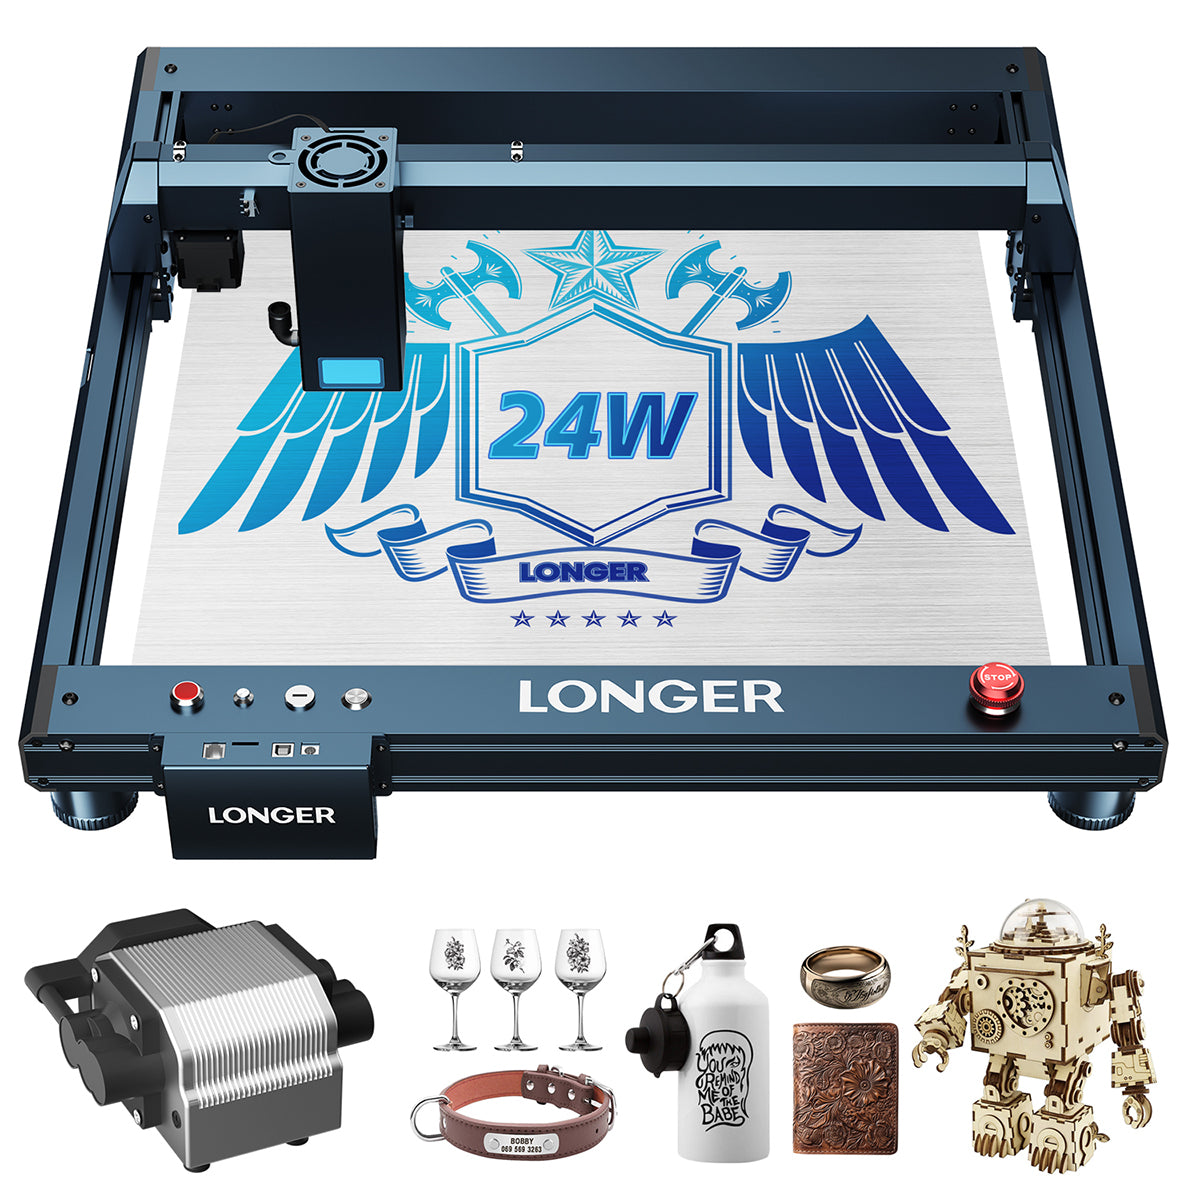 LONGER Laser B1 20W Laser Engraver [Discount&Review] – GearBerry